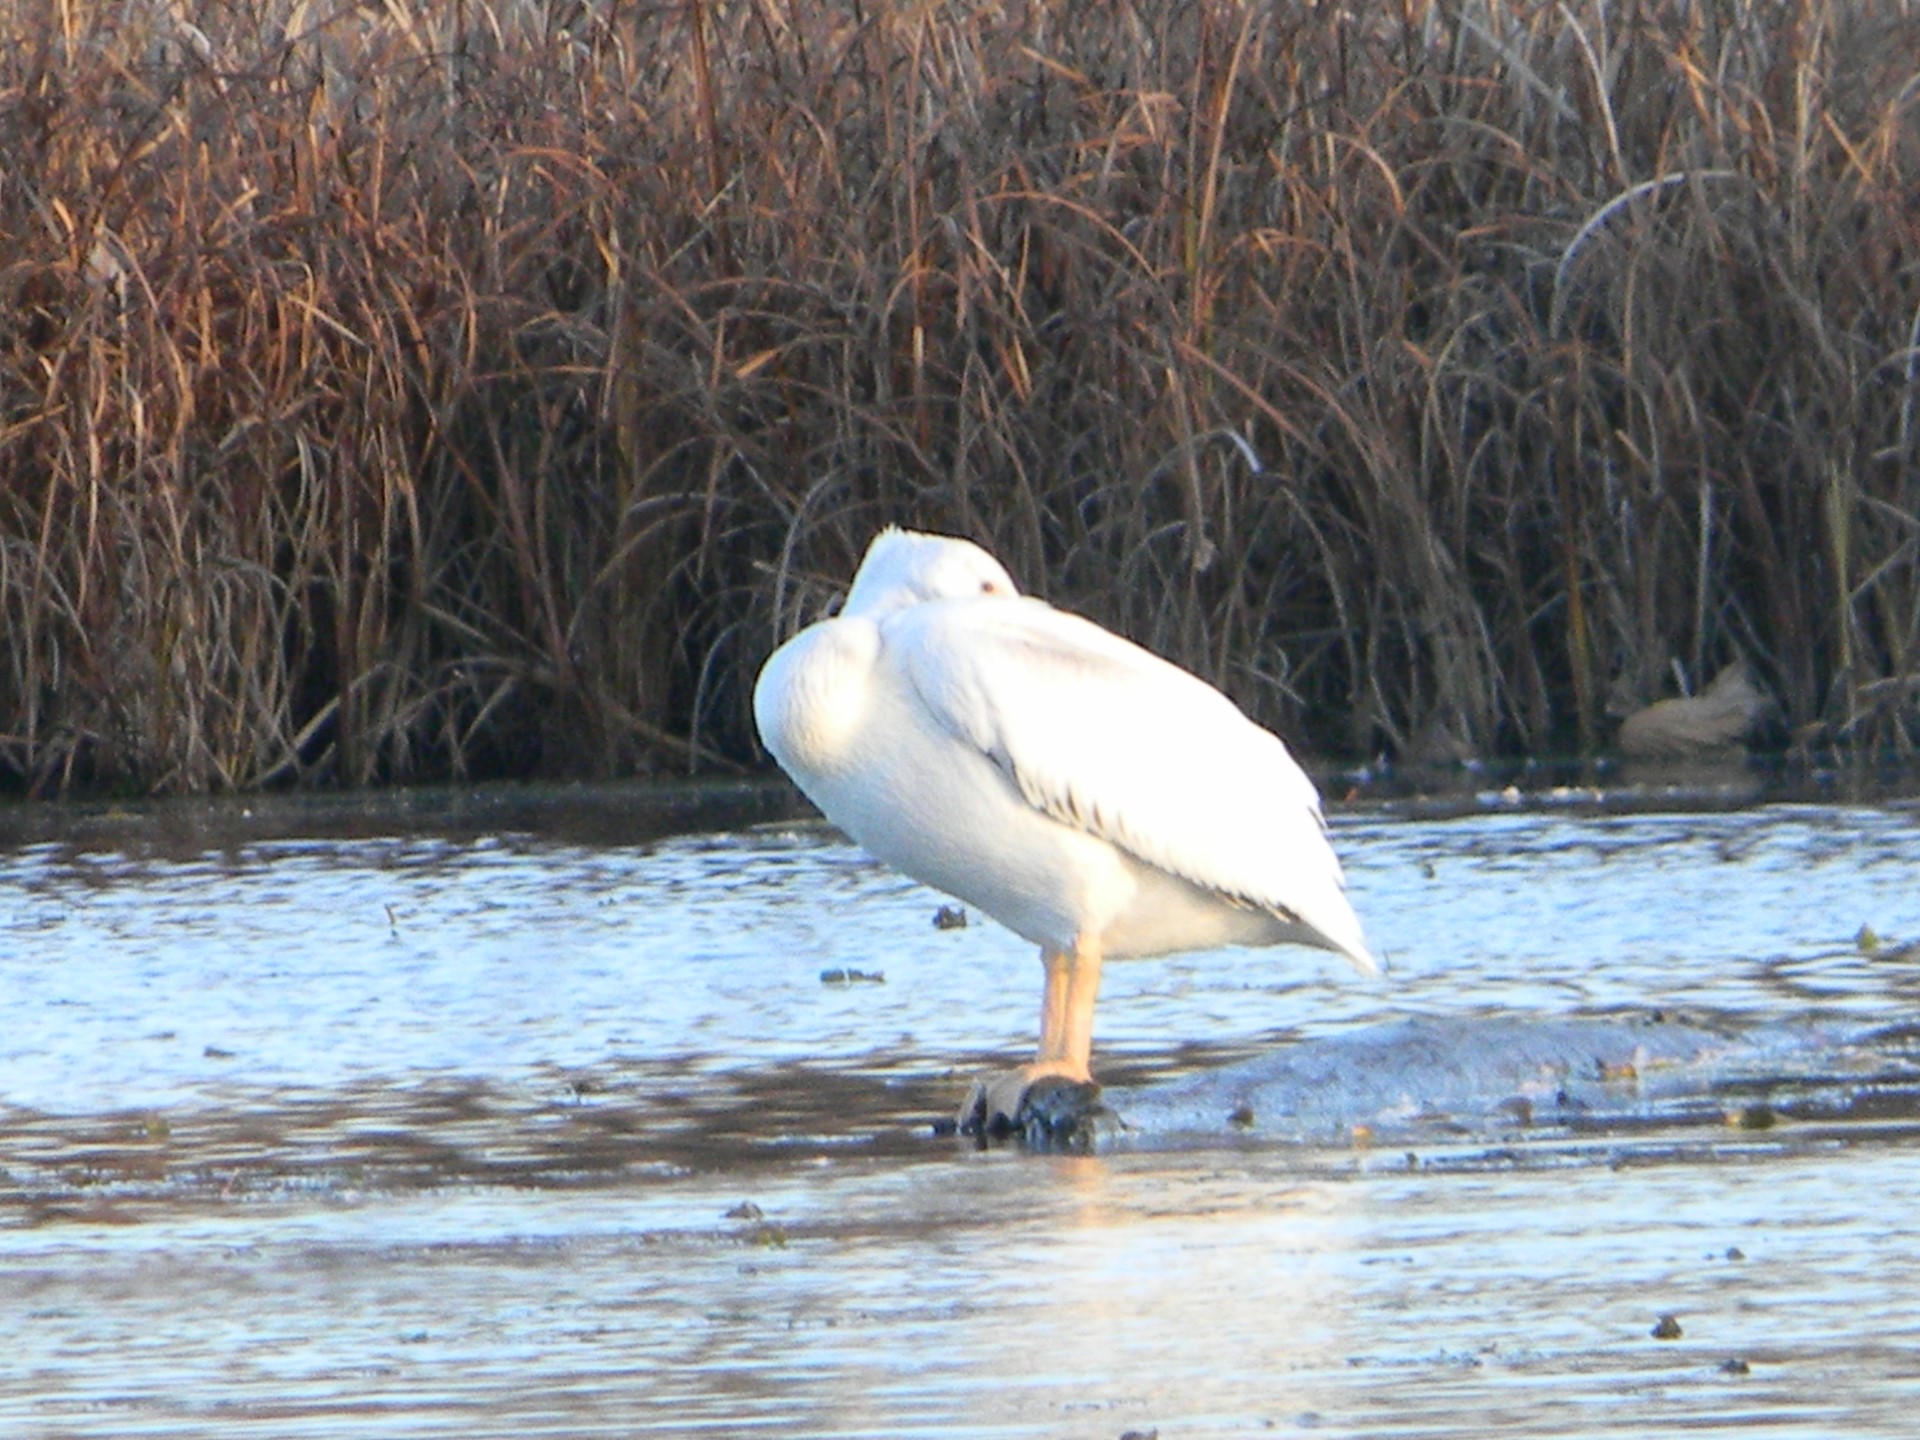 A white bird stands in shallow wetland waters with tall grass and weeds in the background